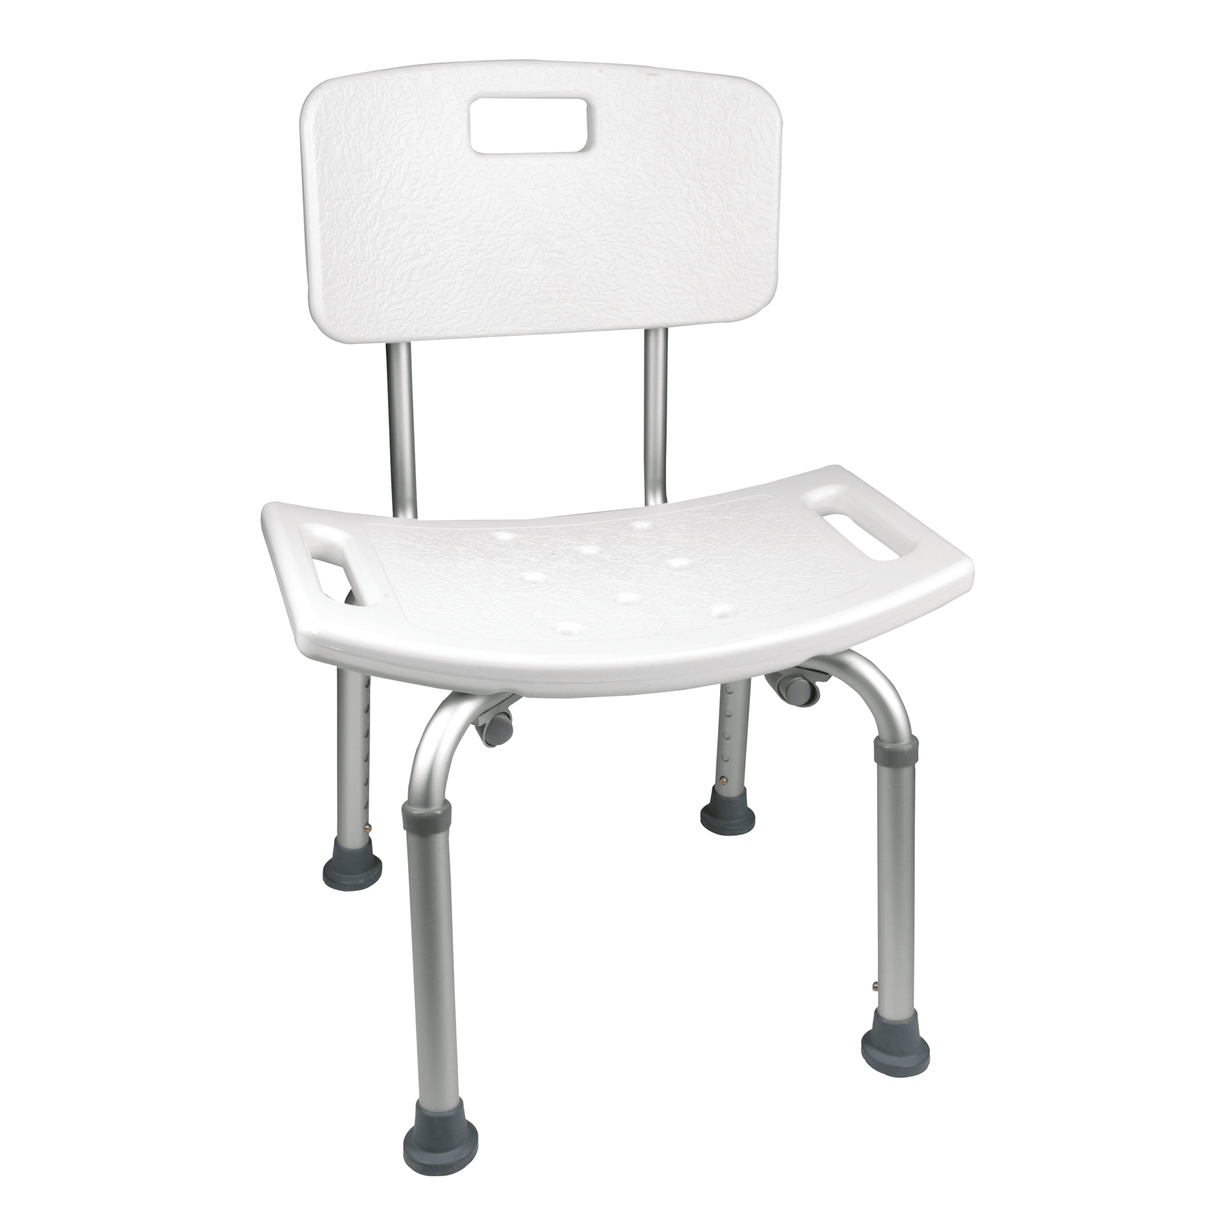 Bathseat with Backrest for Rental in GTA